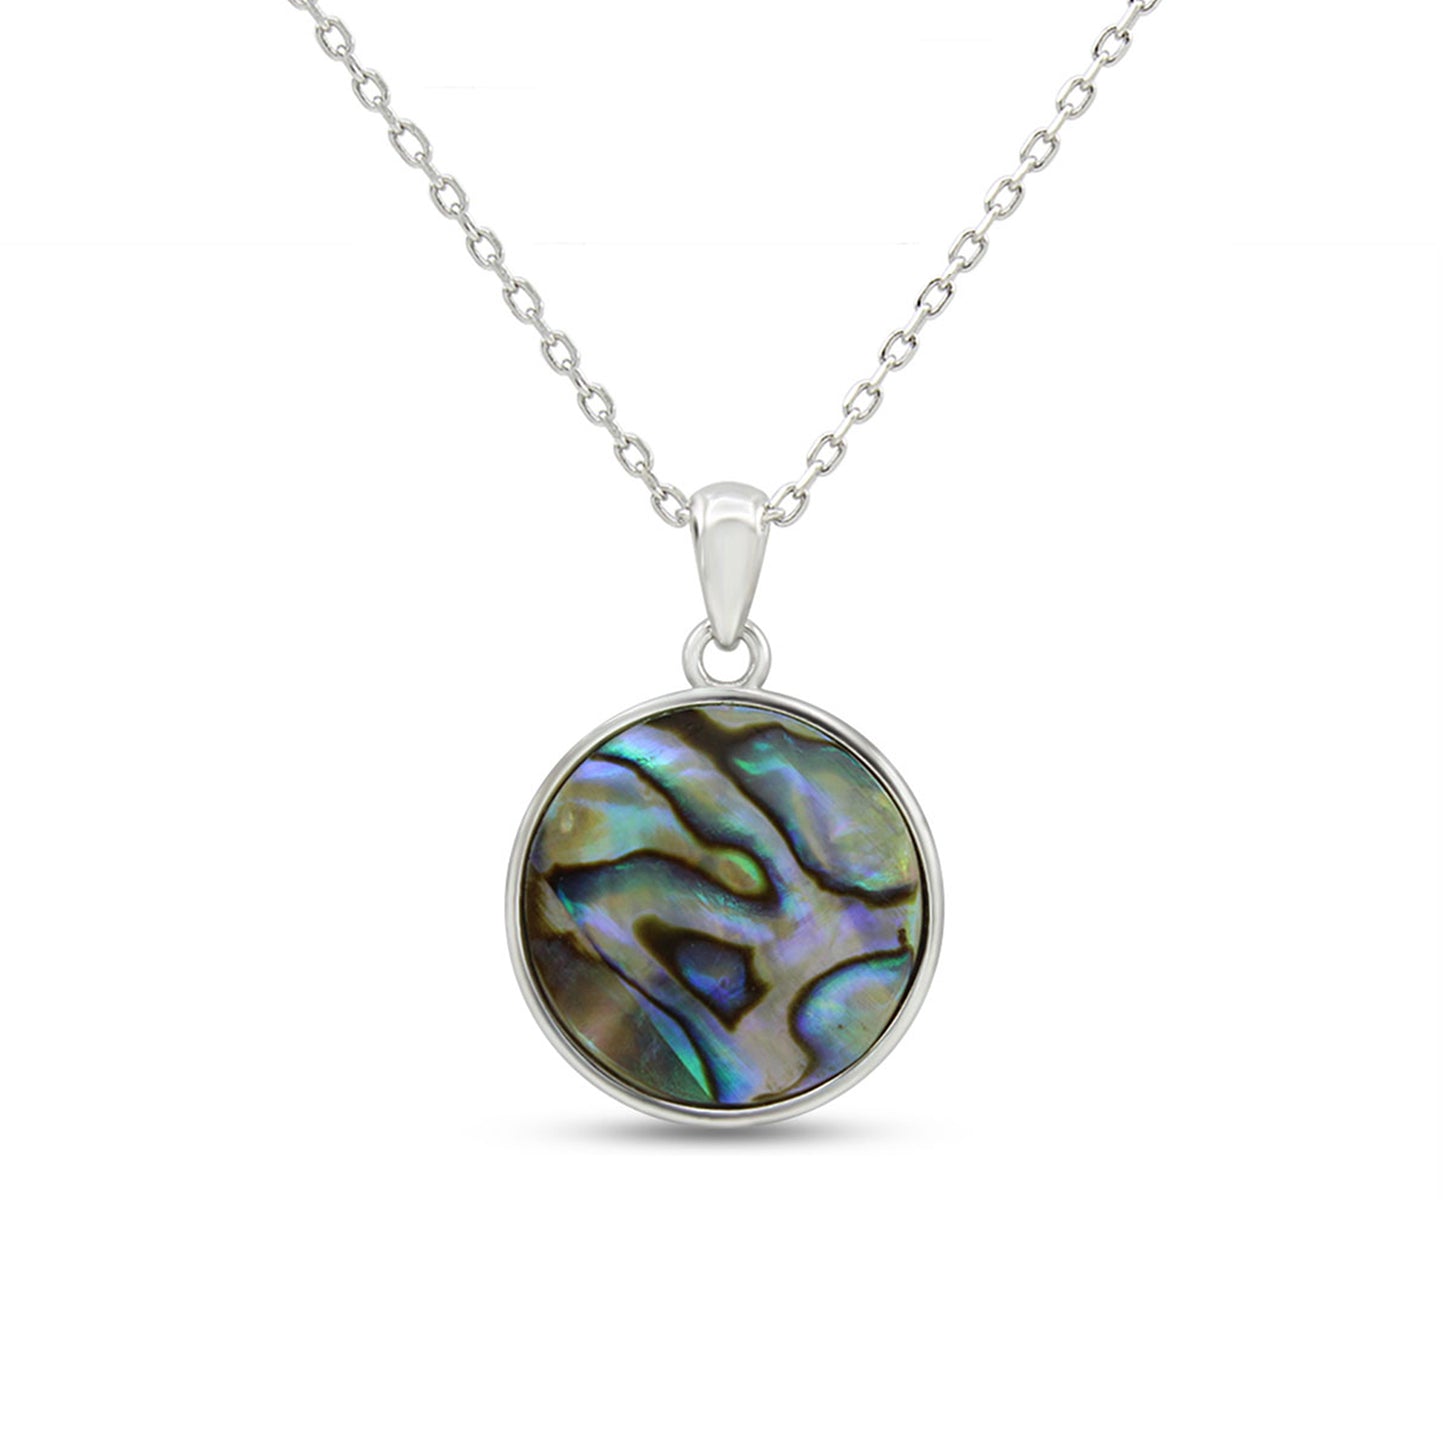 Load image into Gallery viewer, Abalone Shell Animal (Starfish, Dolphin, Seahorse, Frog, Dragonfly, Whale Tail, Turtle) Pendant Necklace In 14K White Gold Over Sterling Silver 14K Gold Over Sterling Silver
